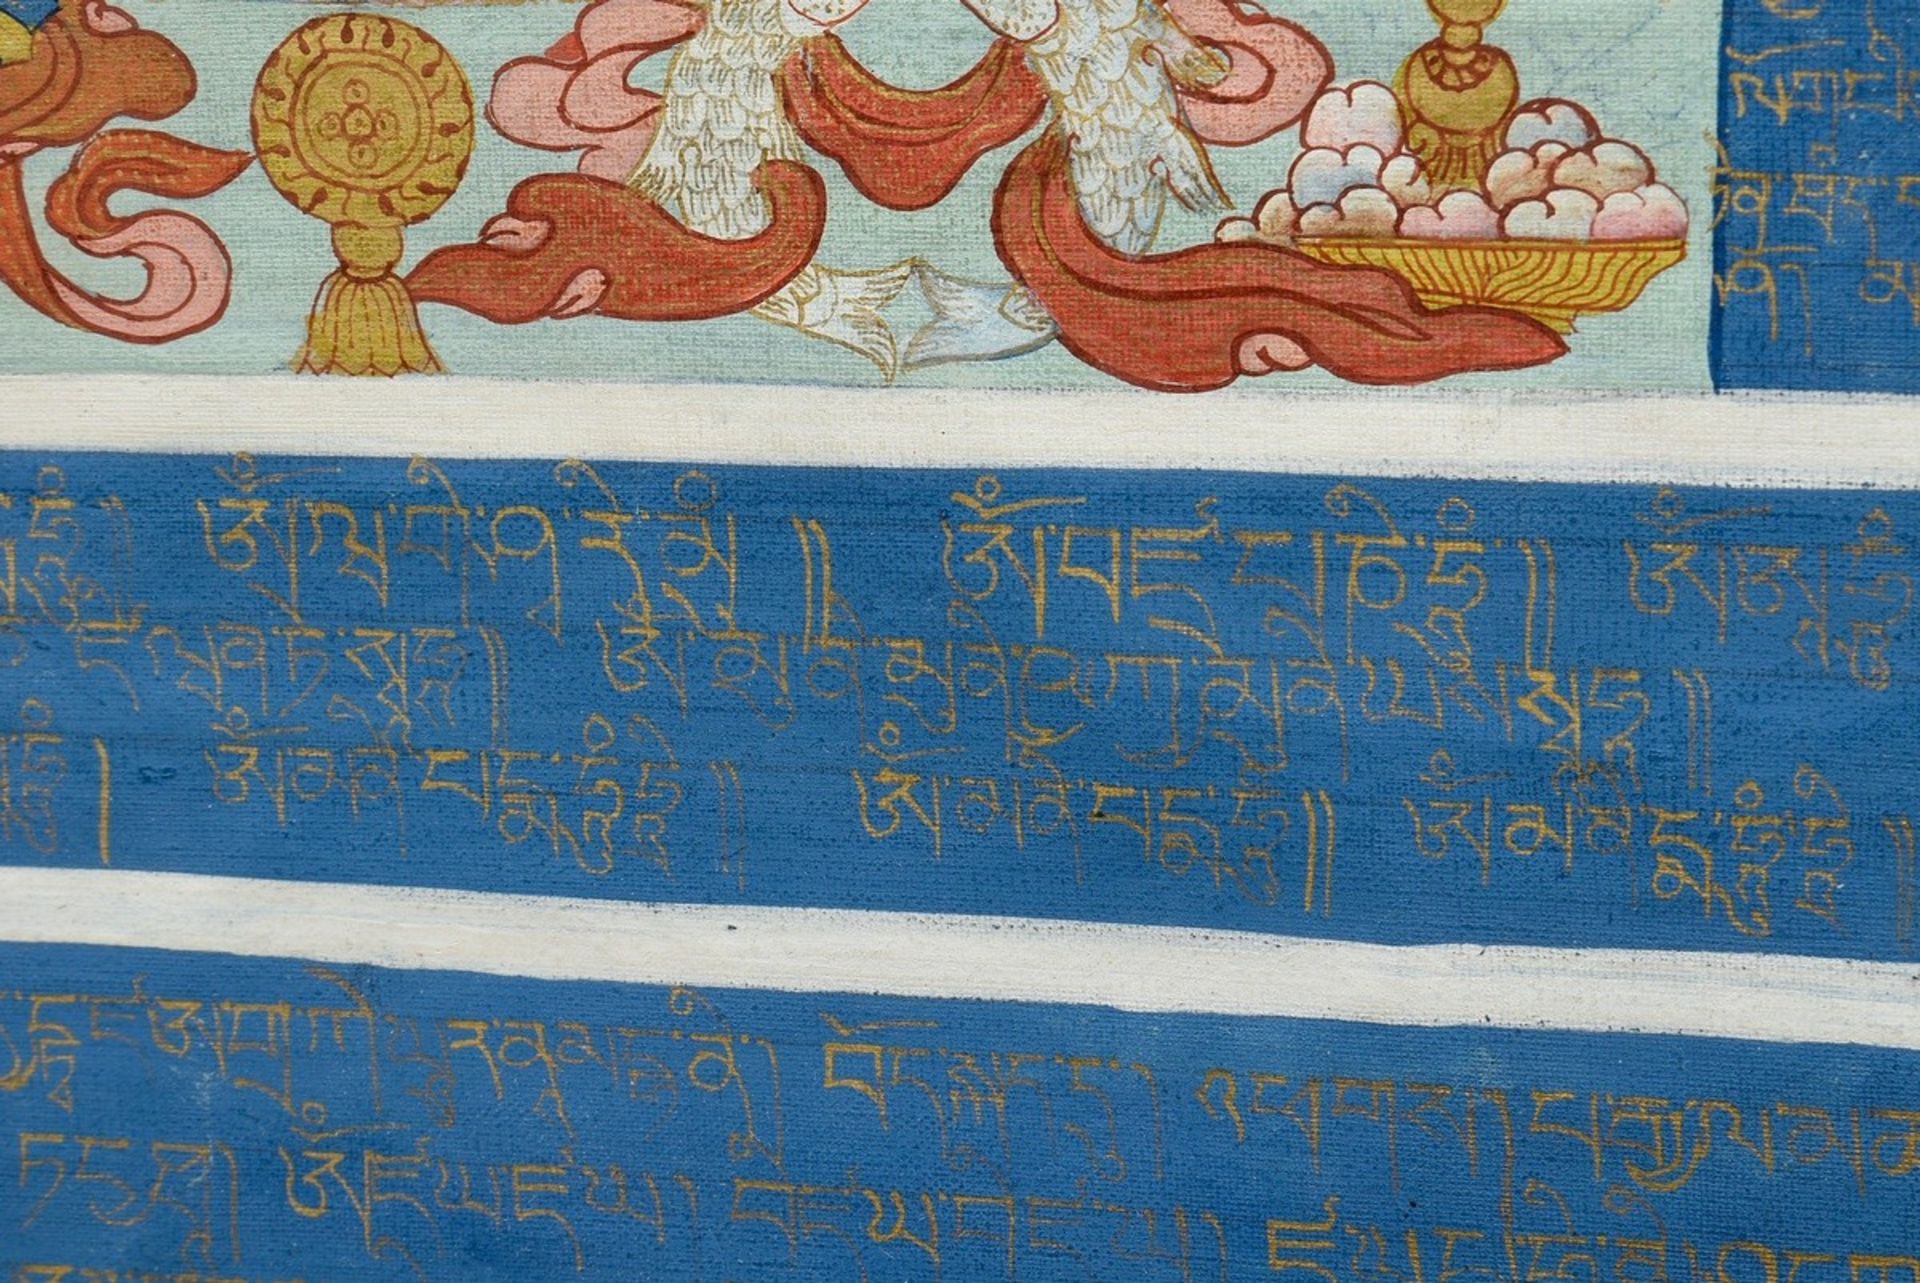 Tibetan thangka with central "Wind Horse" depiction, framed by prayer texts, Buddhist symbols, Bodh - Image 5 of 5